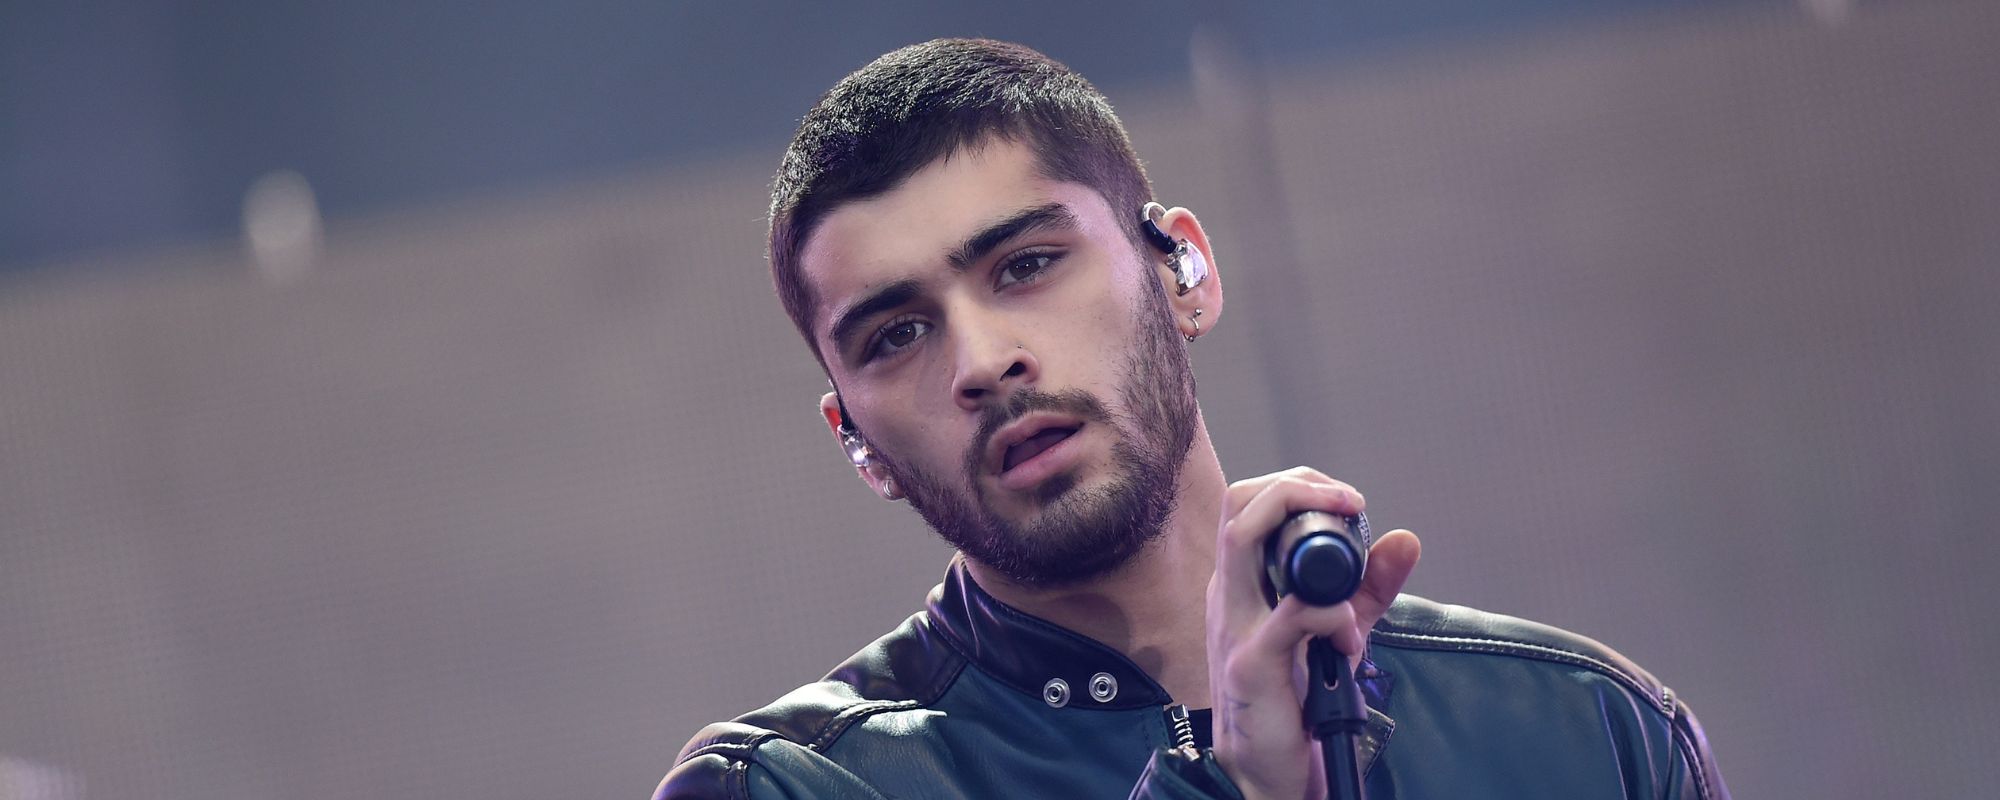 Zayn Malik Talks About his Decision to Leave One Direction: “I Got Ahead of the Curve”